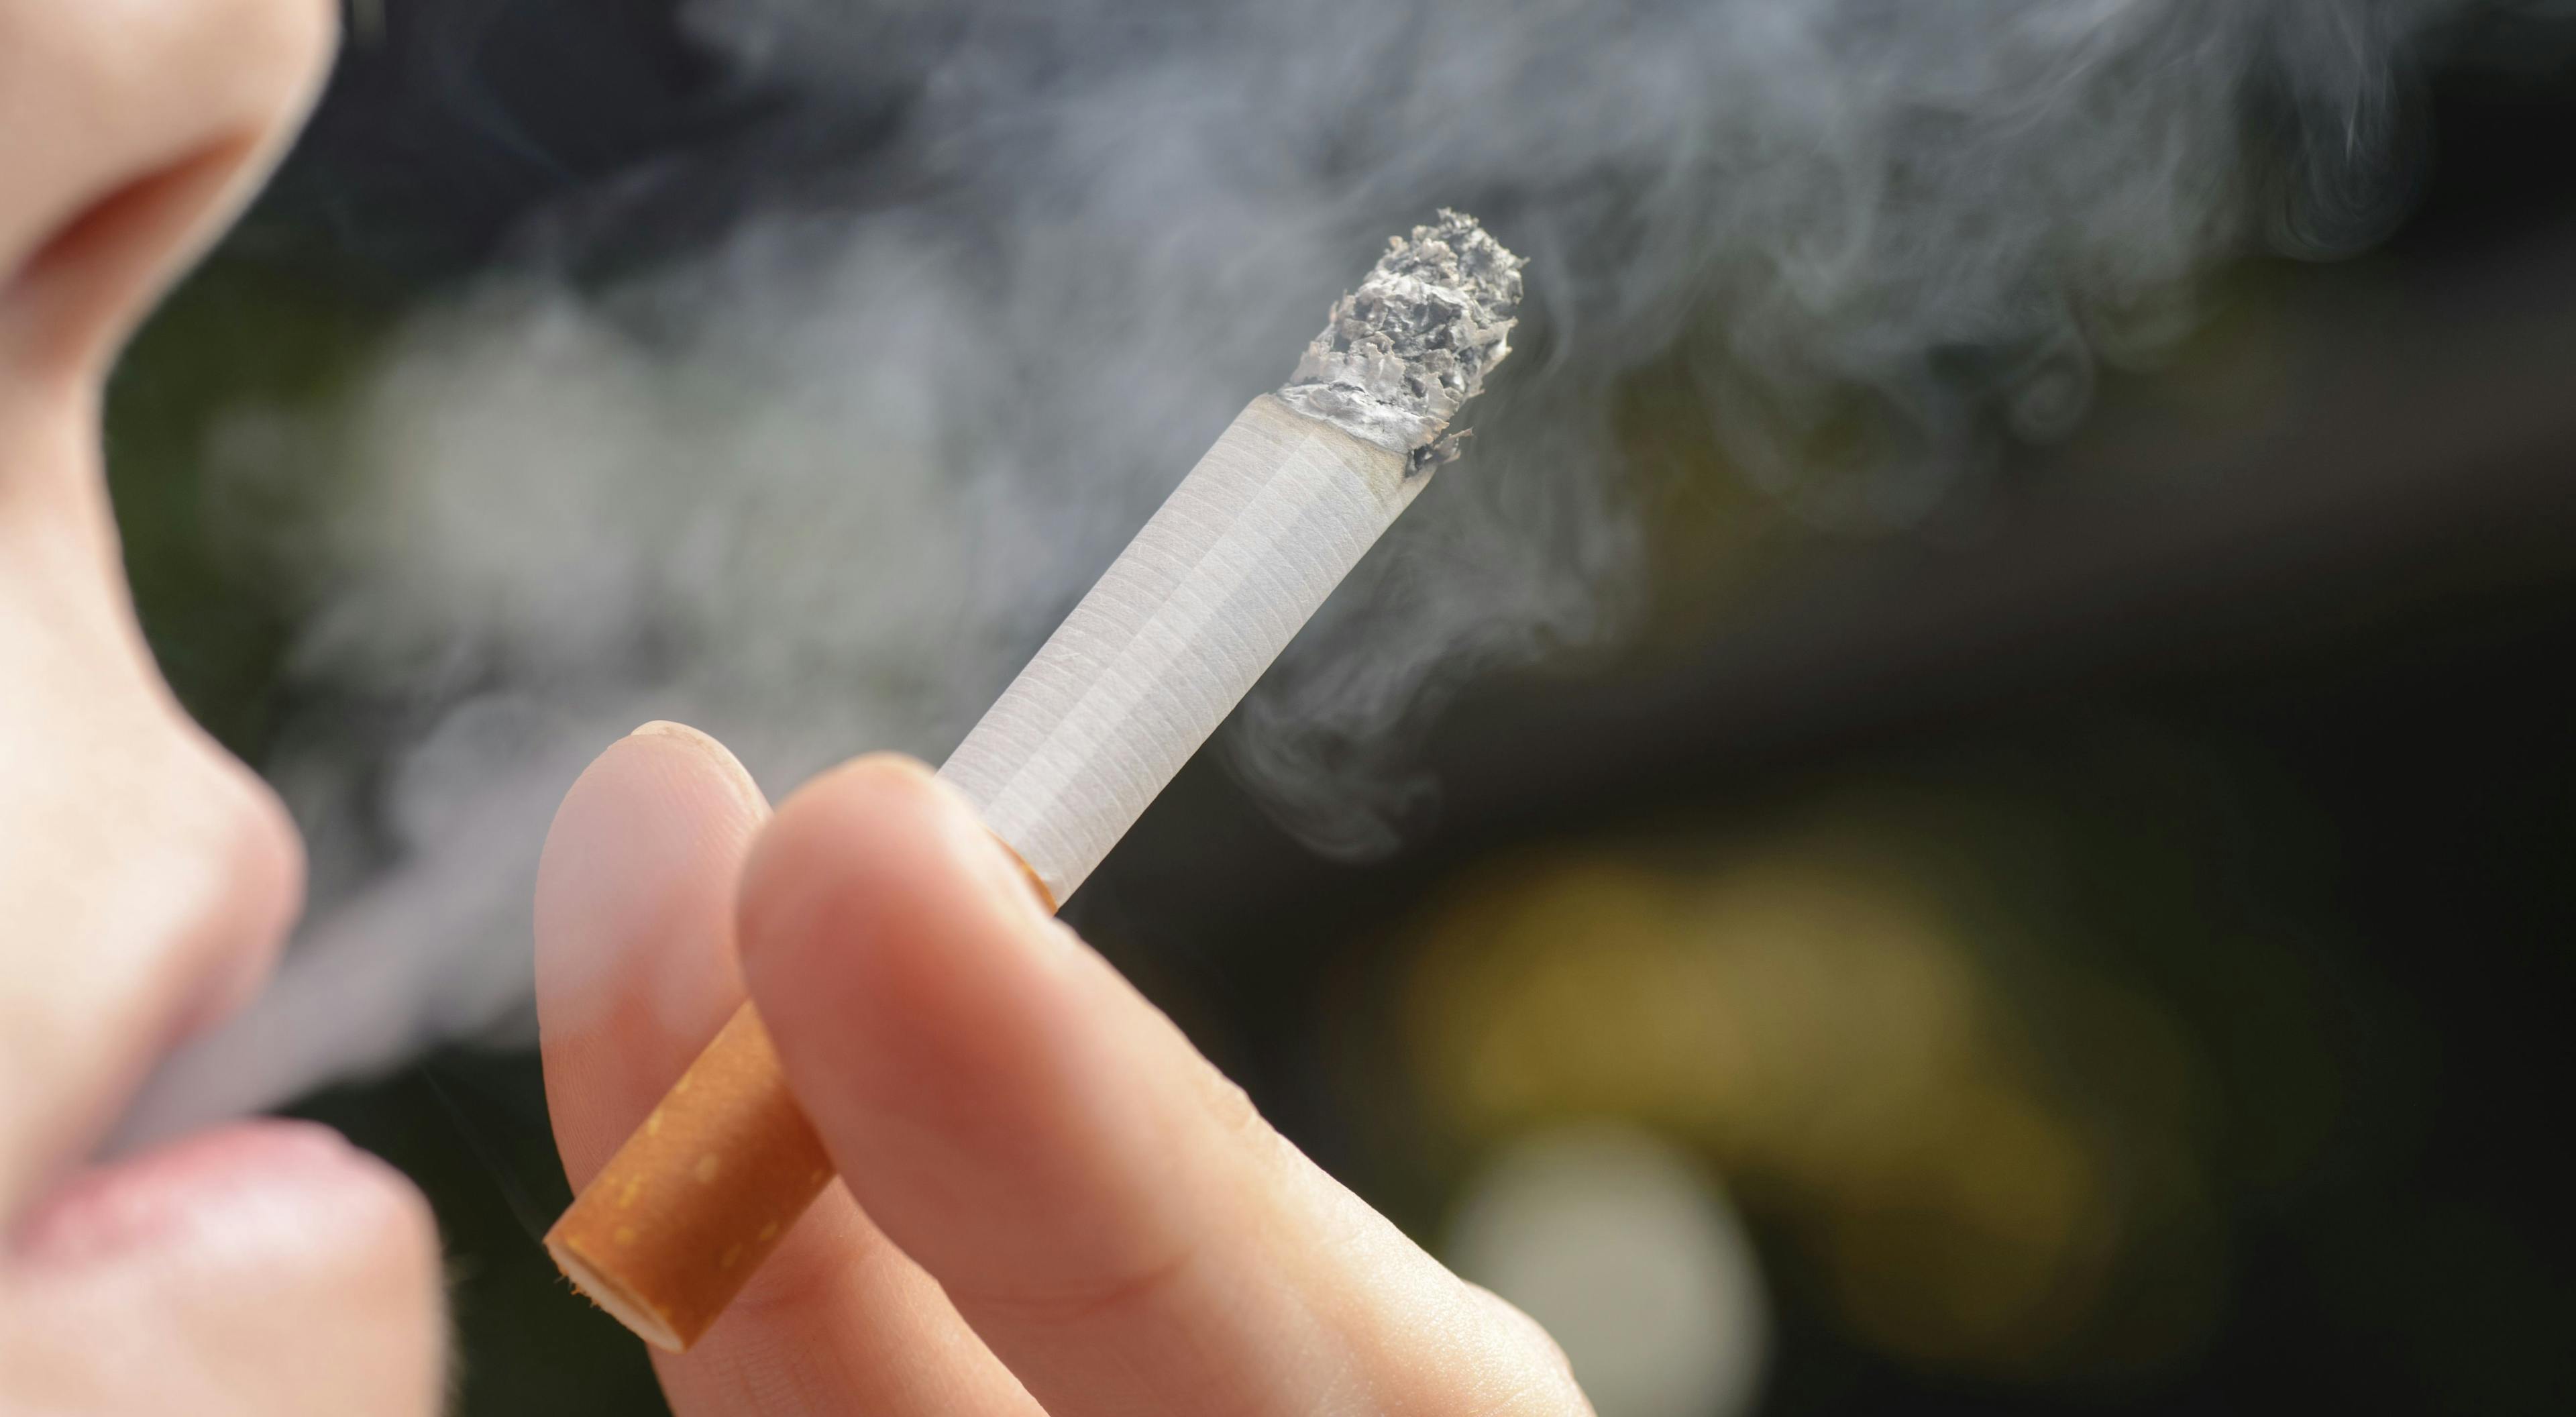 Smoking Cessation Improves Survival Up to Two Years Before a Lung Cancer Diagnosis